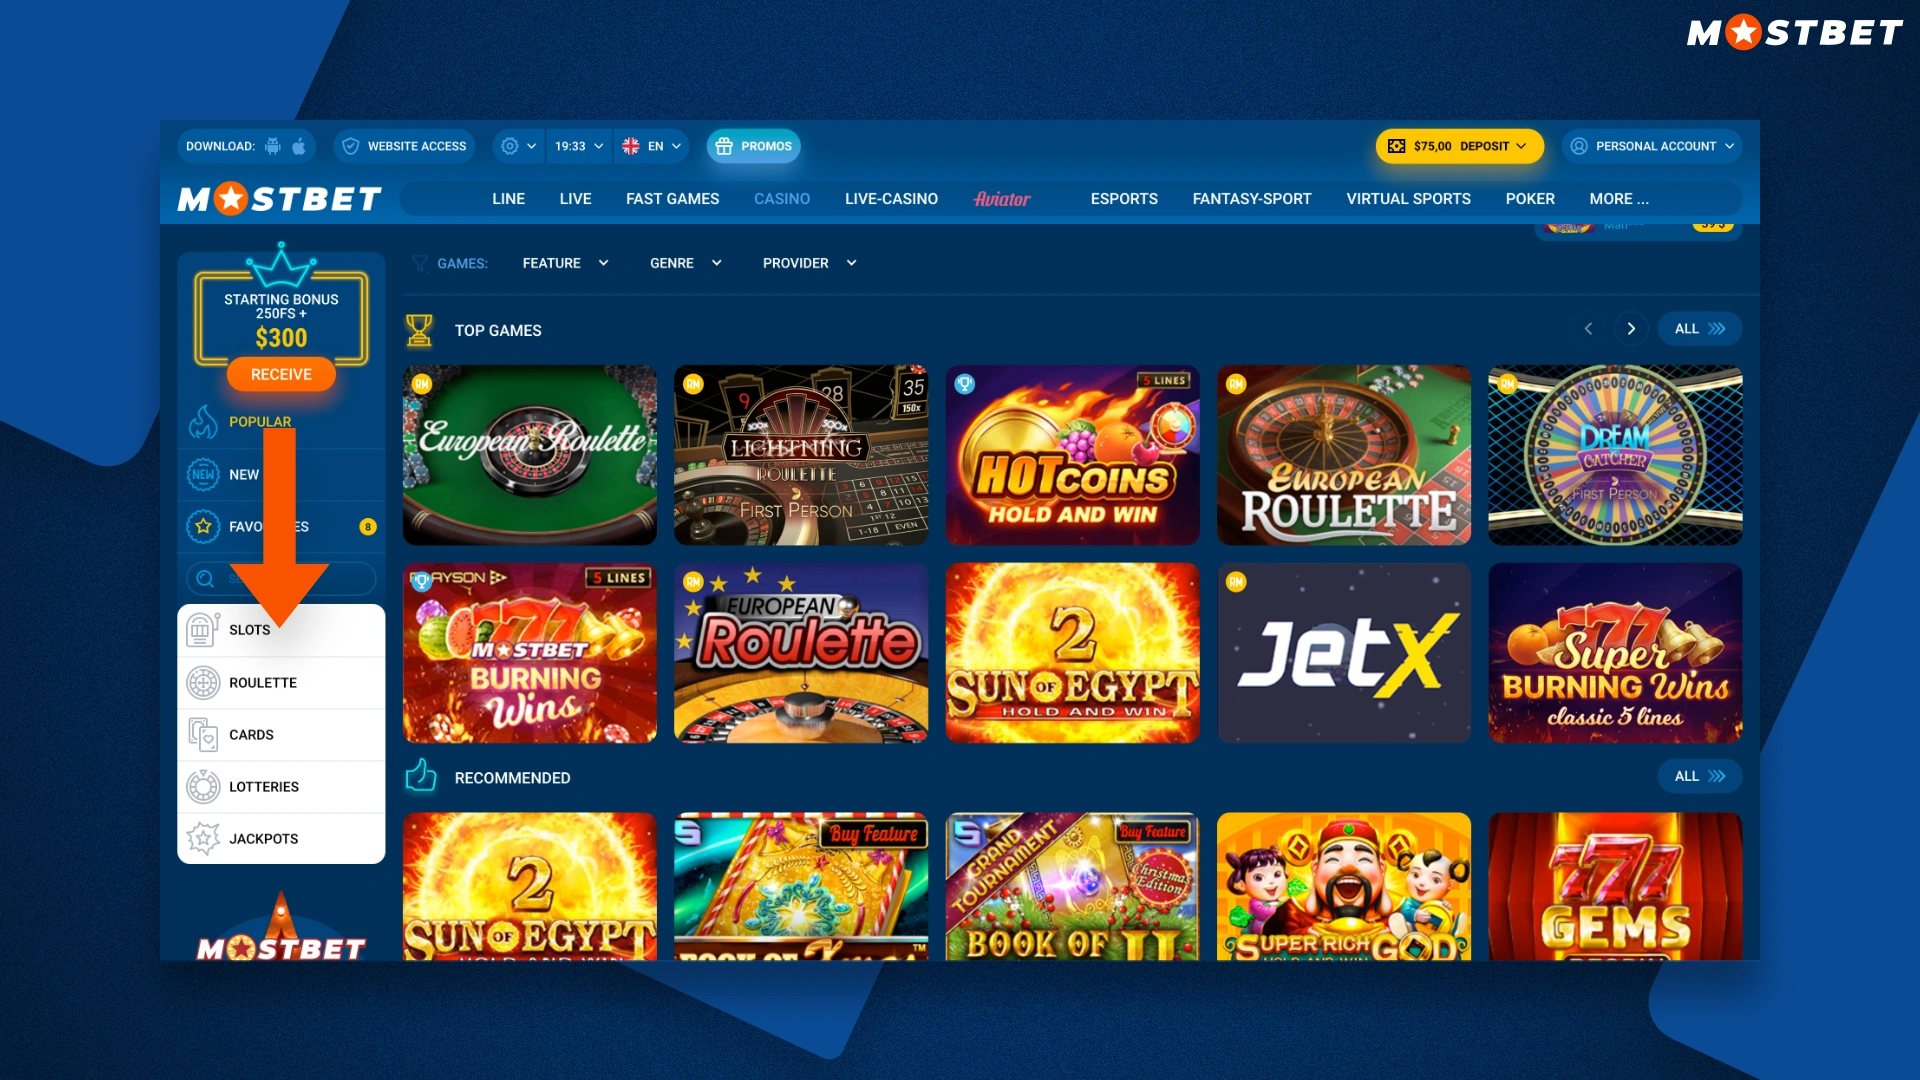 casino section at mostbet website